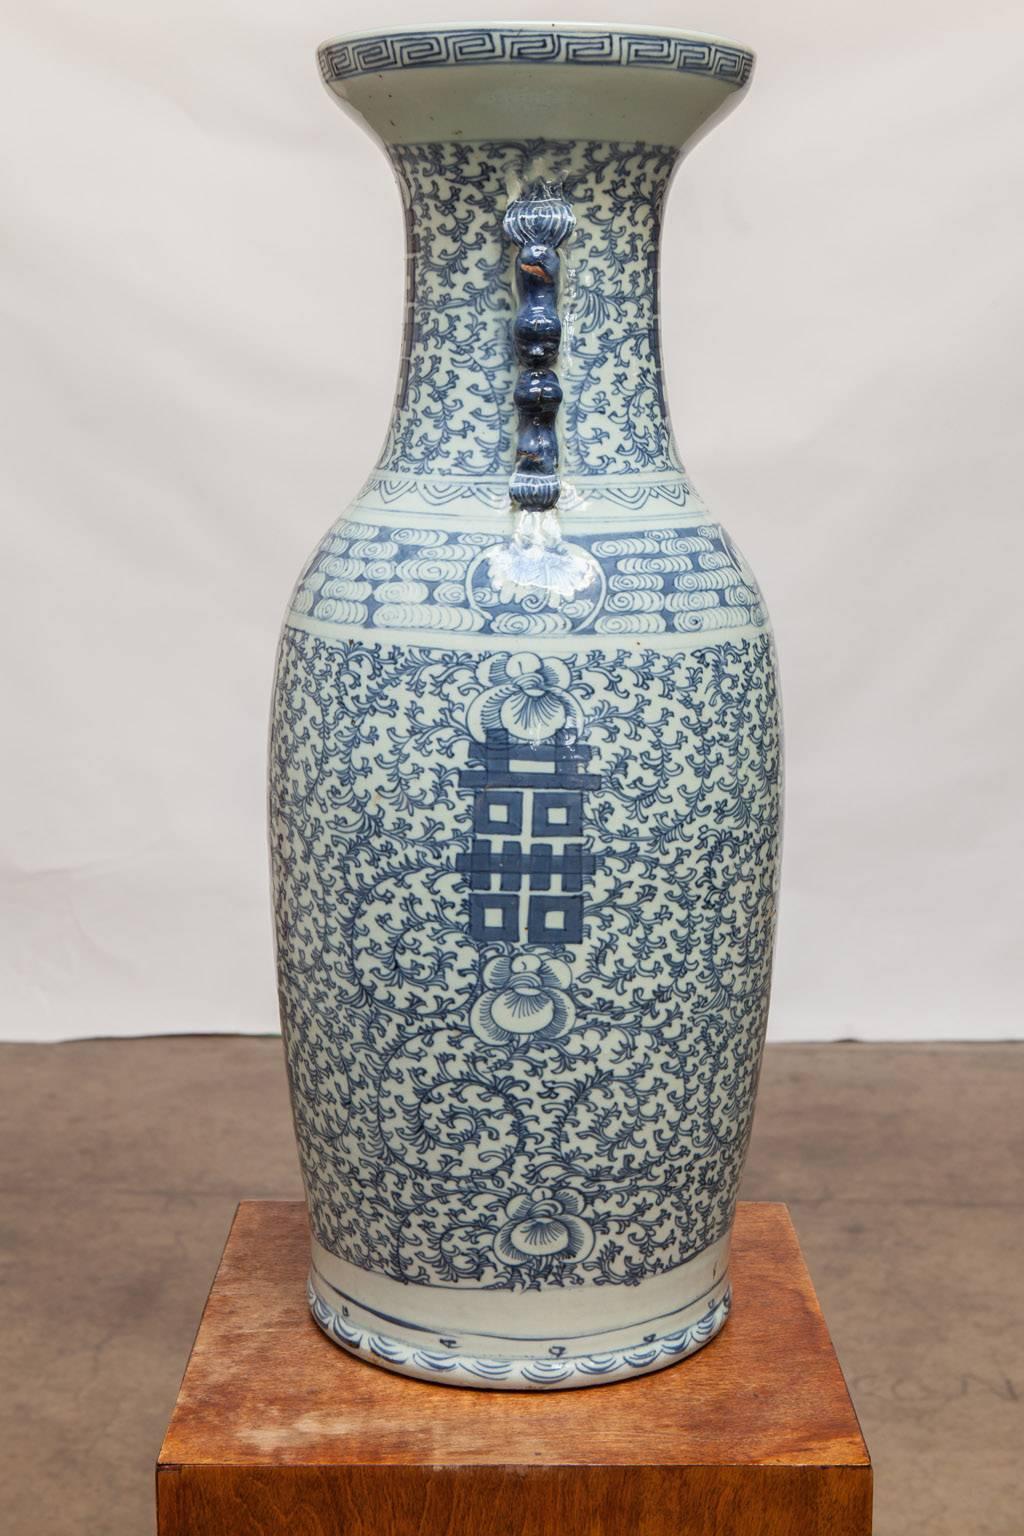 Lovely 19th century Chinese blue and white porcelain handled vase decorated with double happiness characters amidst a busy background of leafy floral scrolls. The neck is flanked by pairs of foo dog or foo lion.